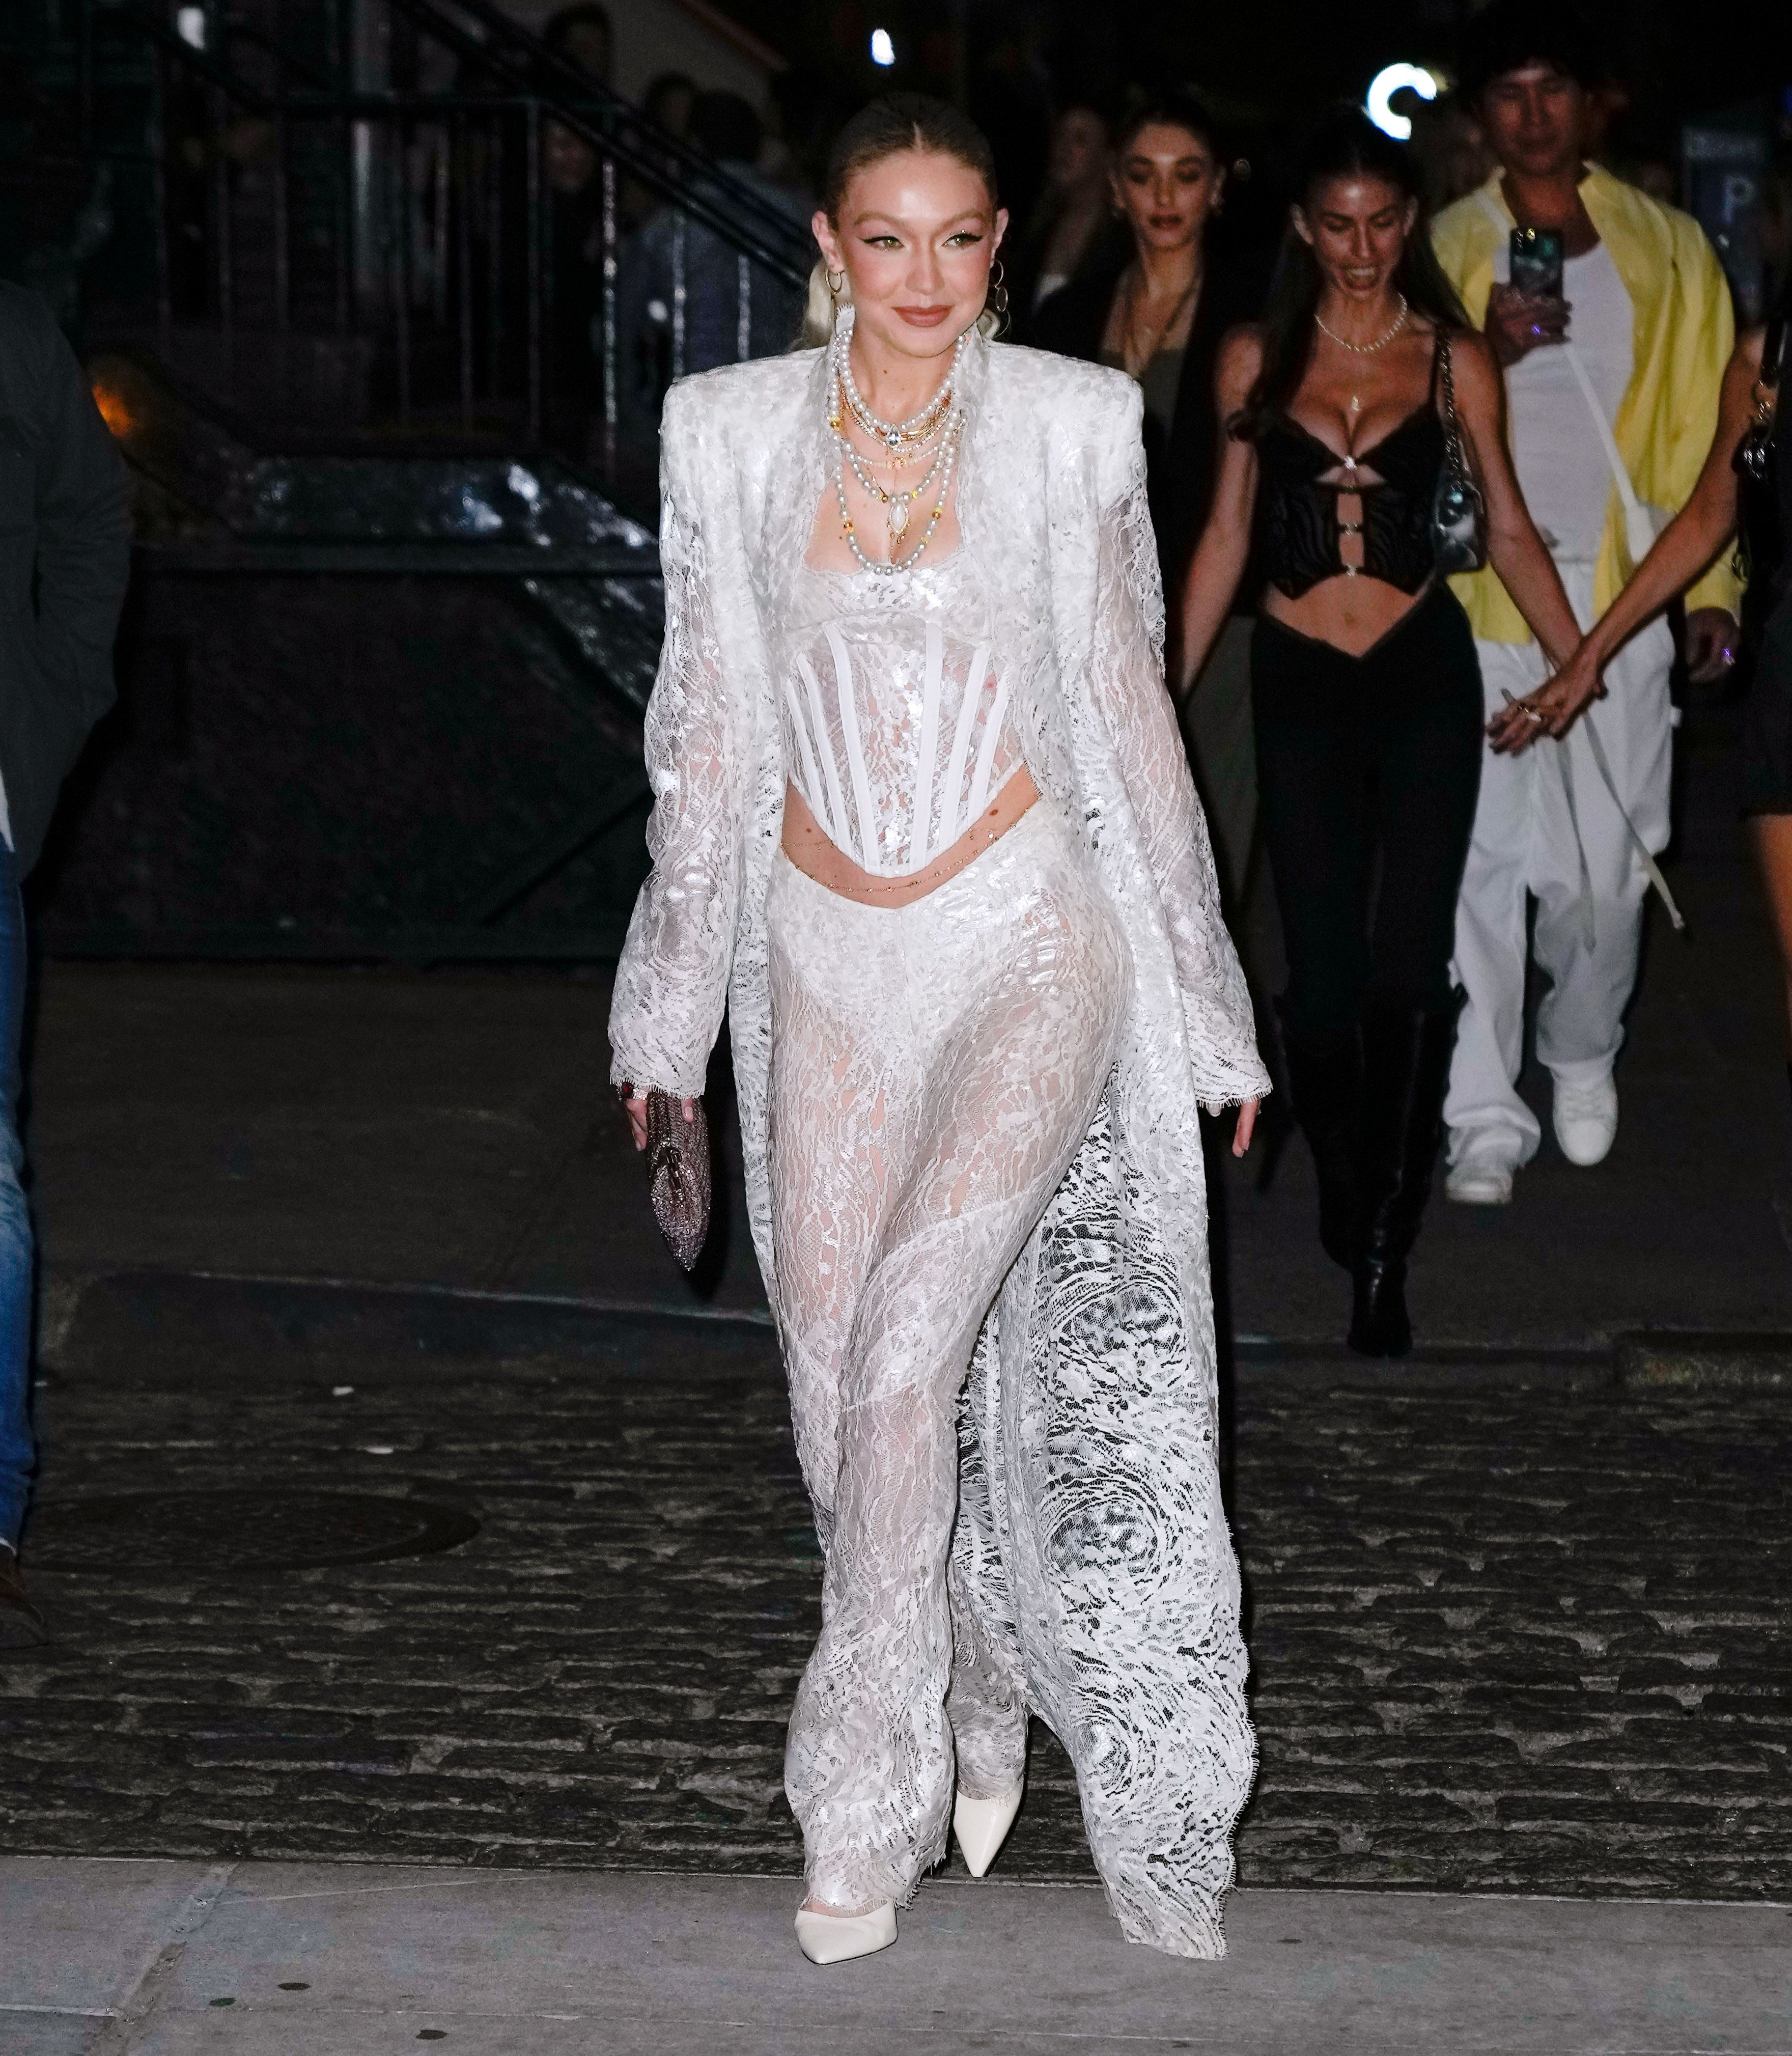 Gigi Hadid's 7 Most Daring Outfits Ever